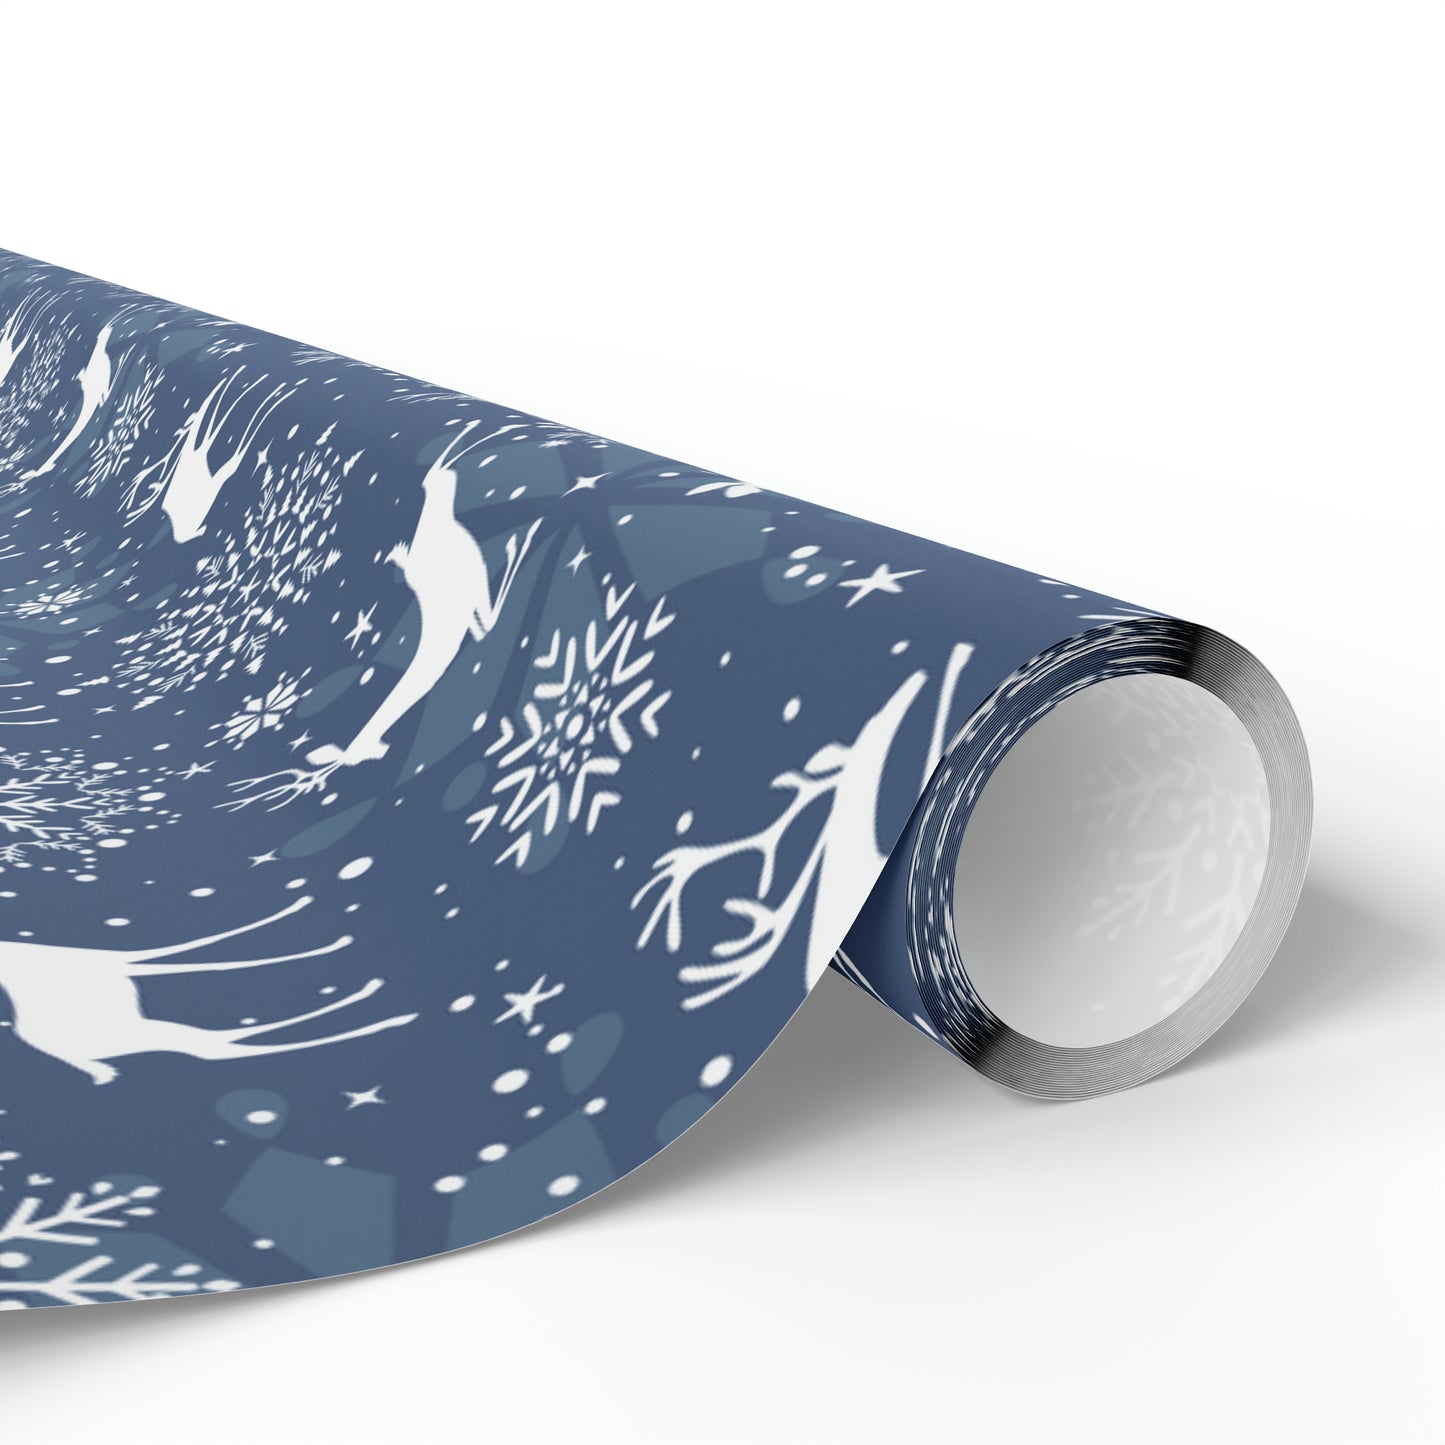 Reindeers and Snowflakes Gift Wrap Paper